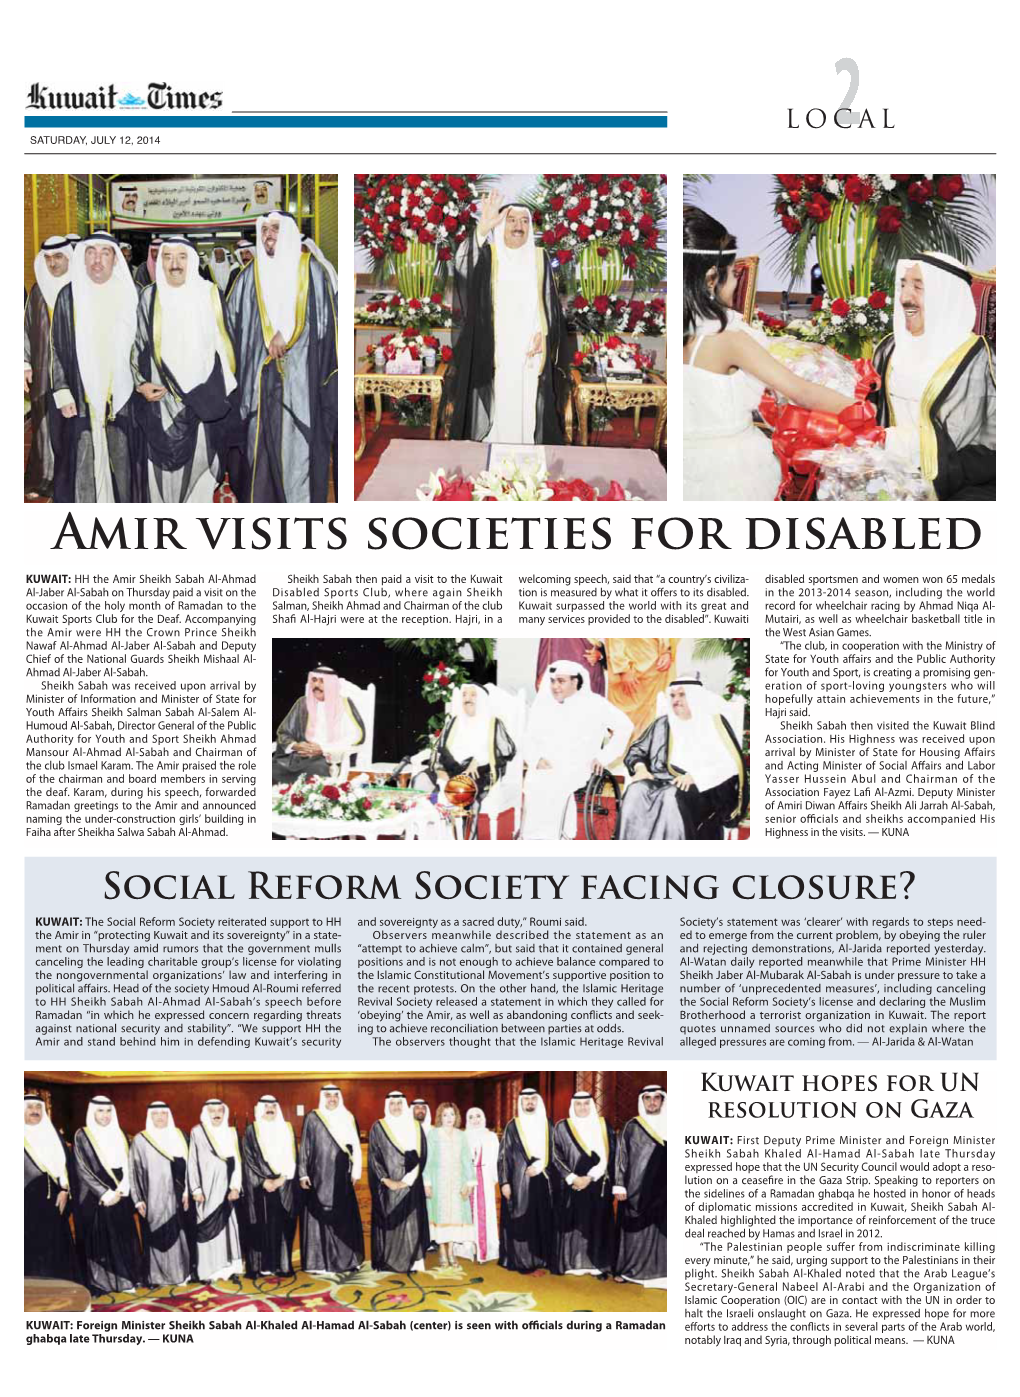 Amir Visits Societies for Disabled